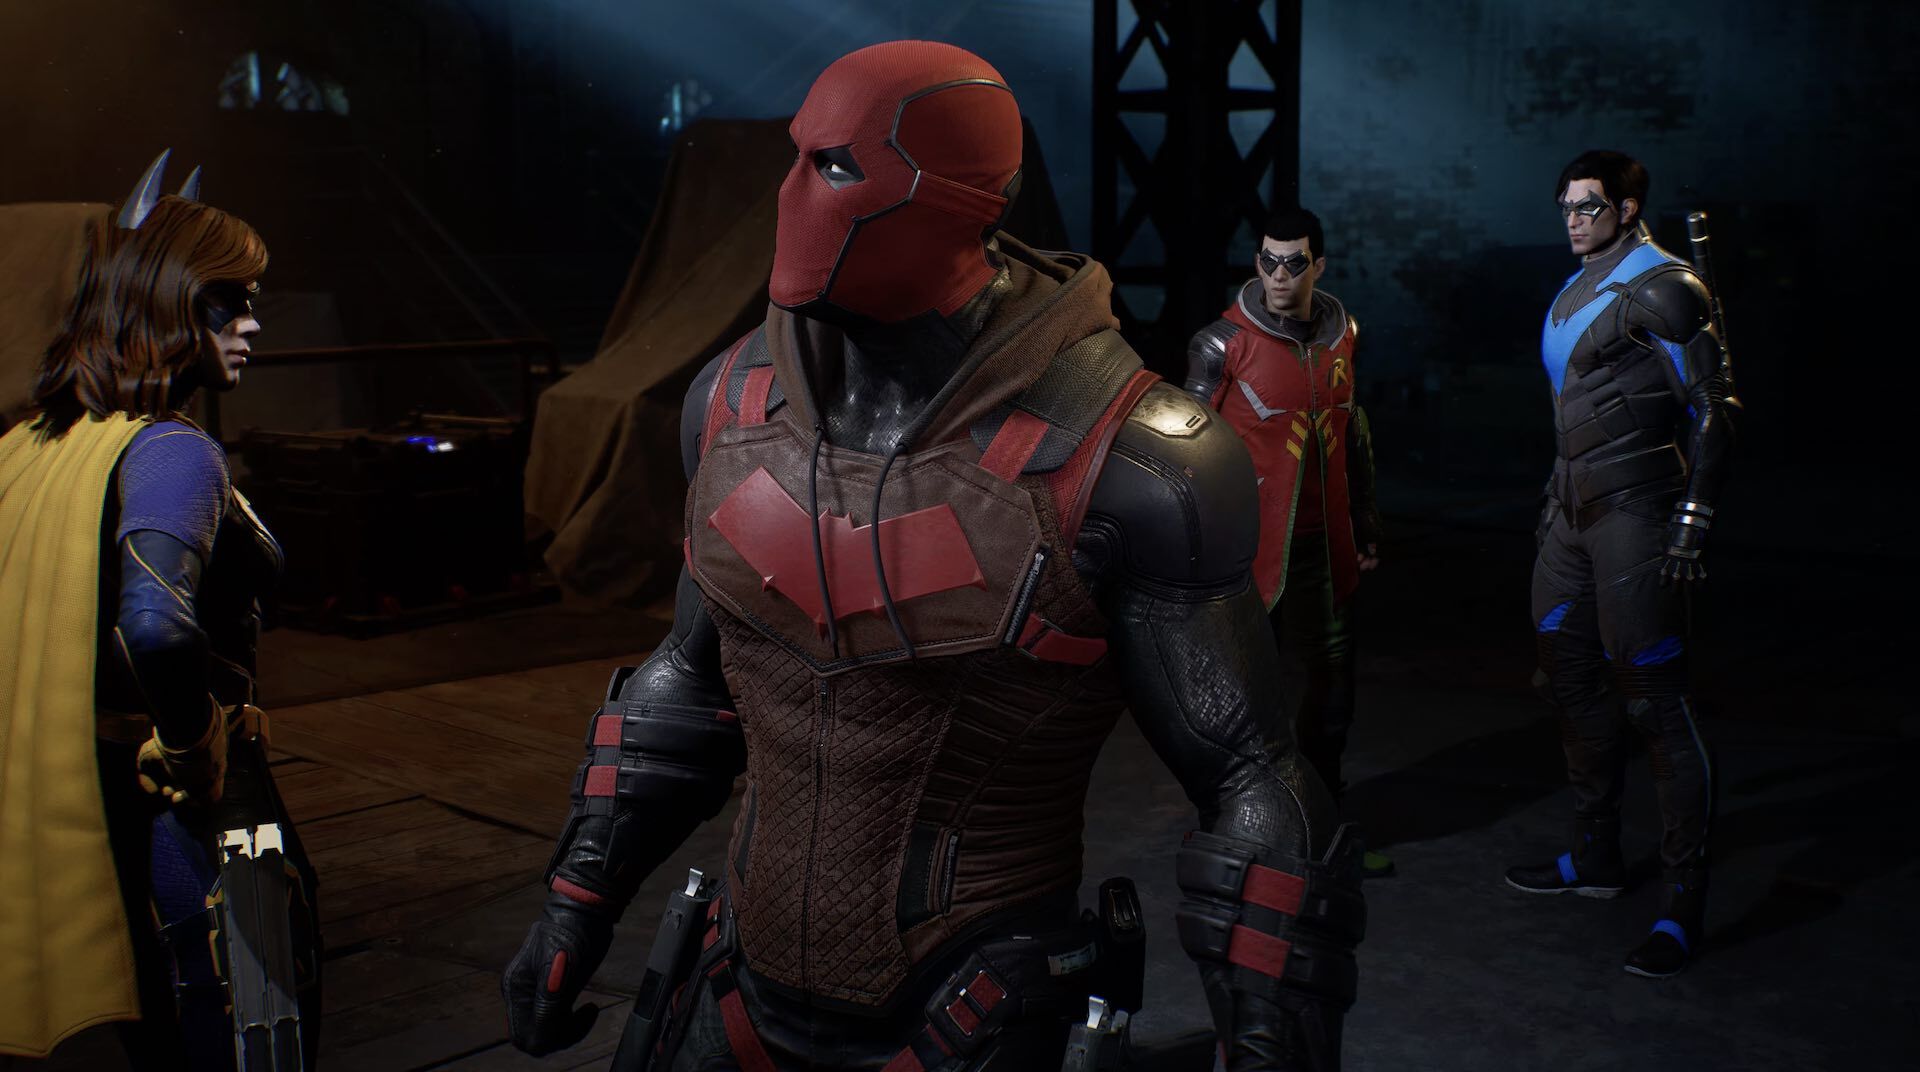 Gotham Knights Red Hood gameplay video divides fan opinion